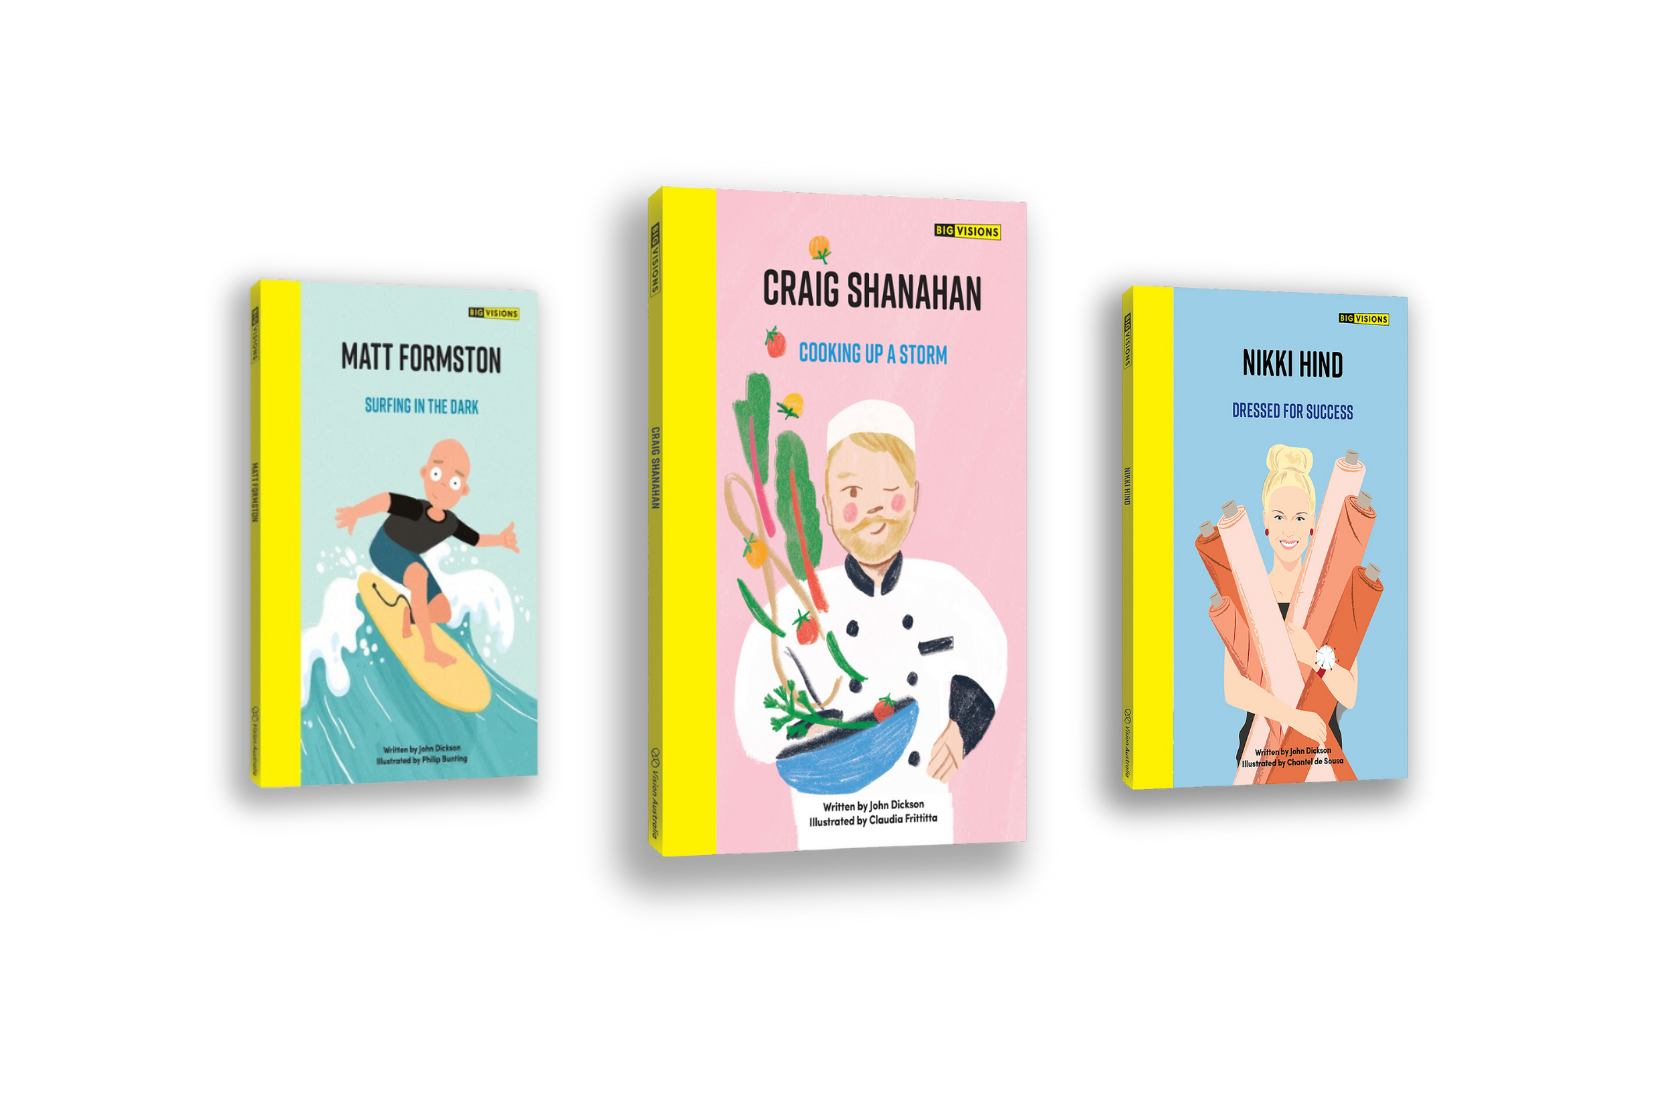 Three books from the Big Visions book series - 'Surfing in the Dark', 'Cooking Up a Storm', and 'Dressed for Success'